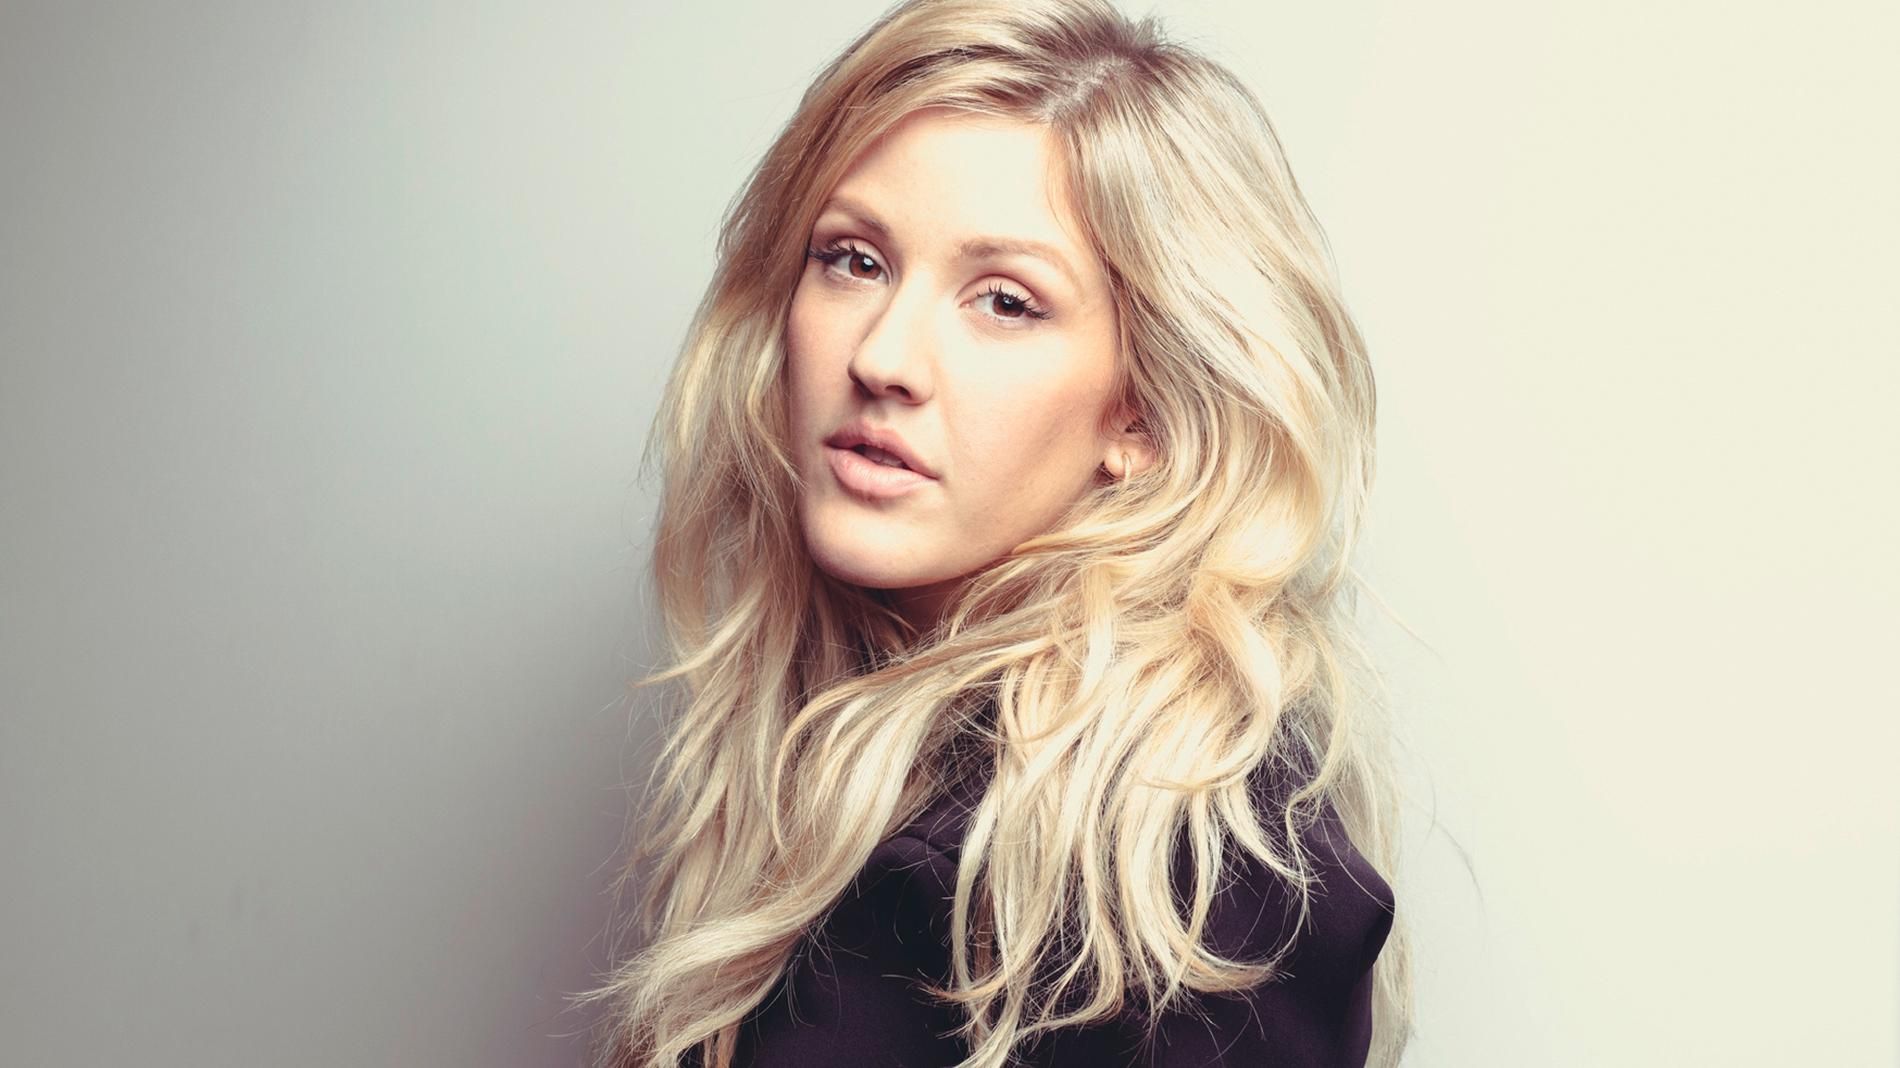 holy night ellie goulding m4a